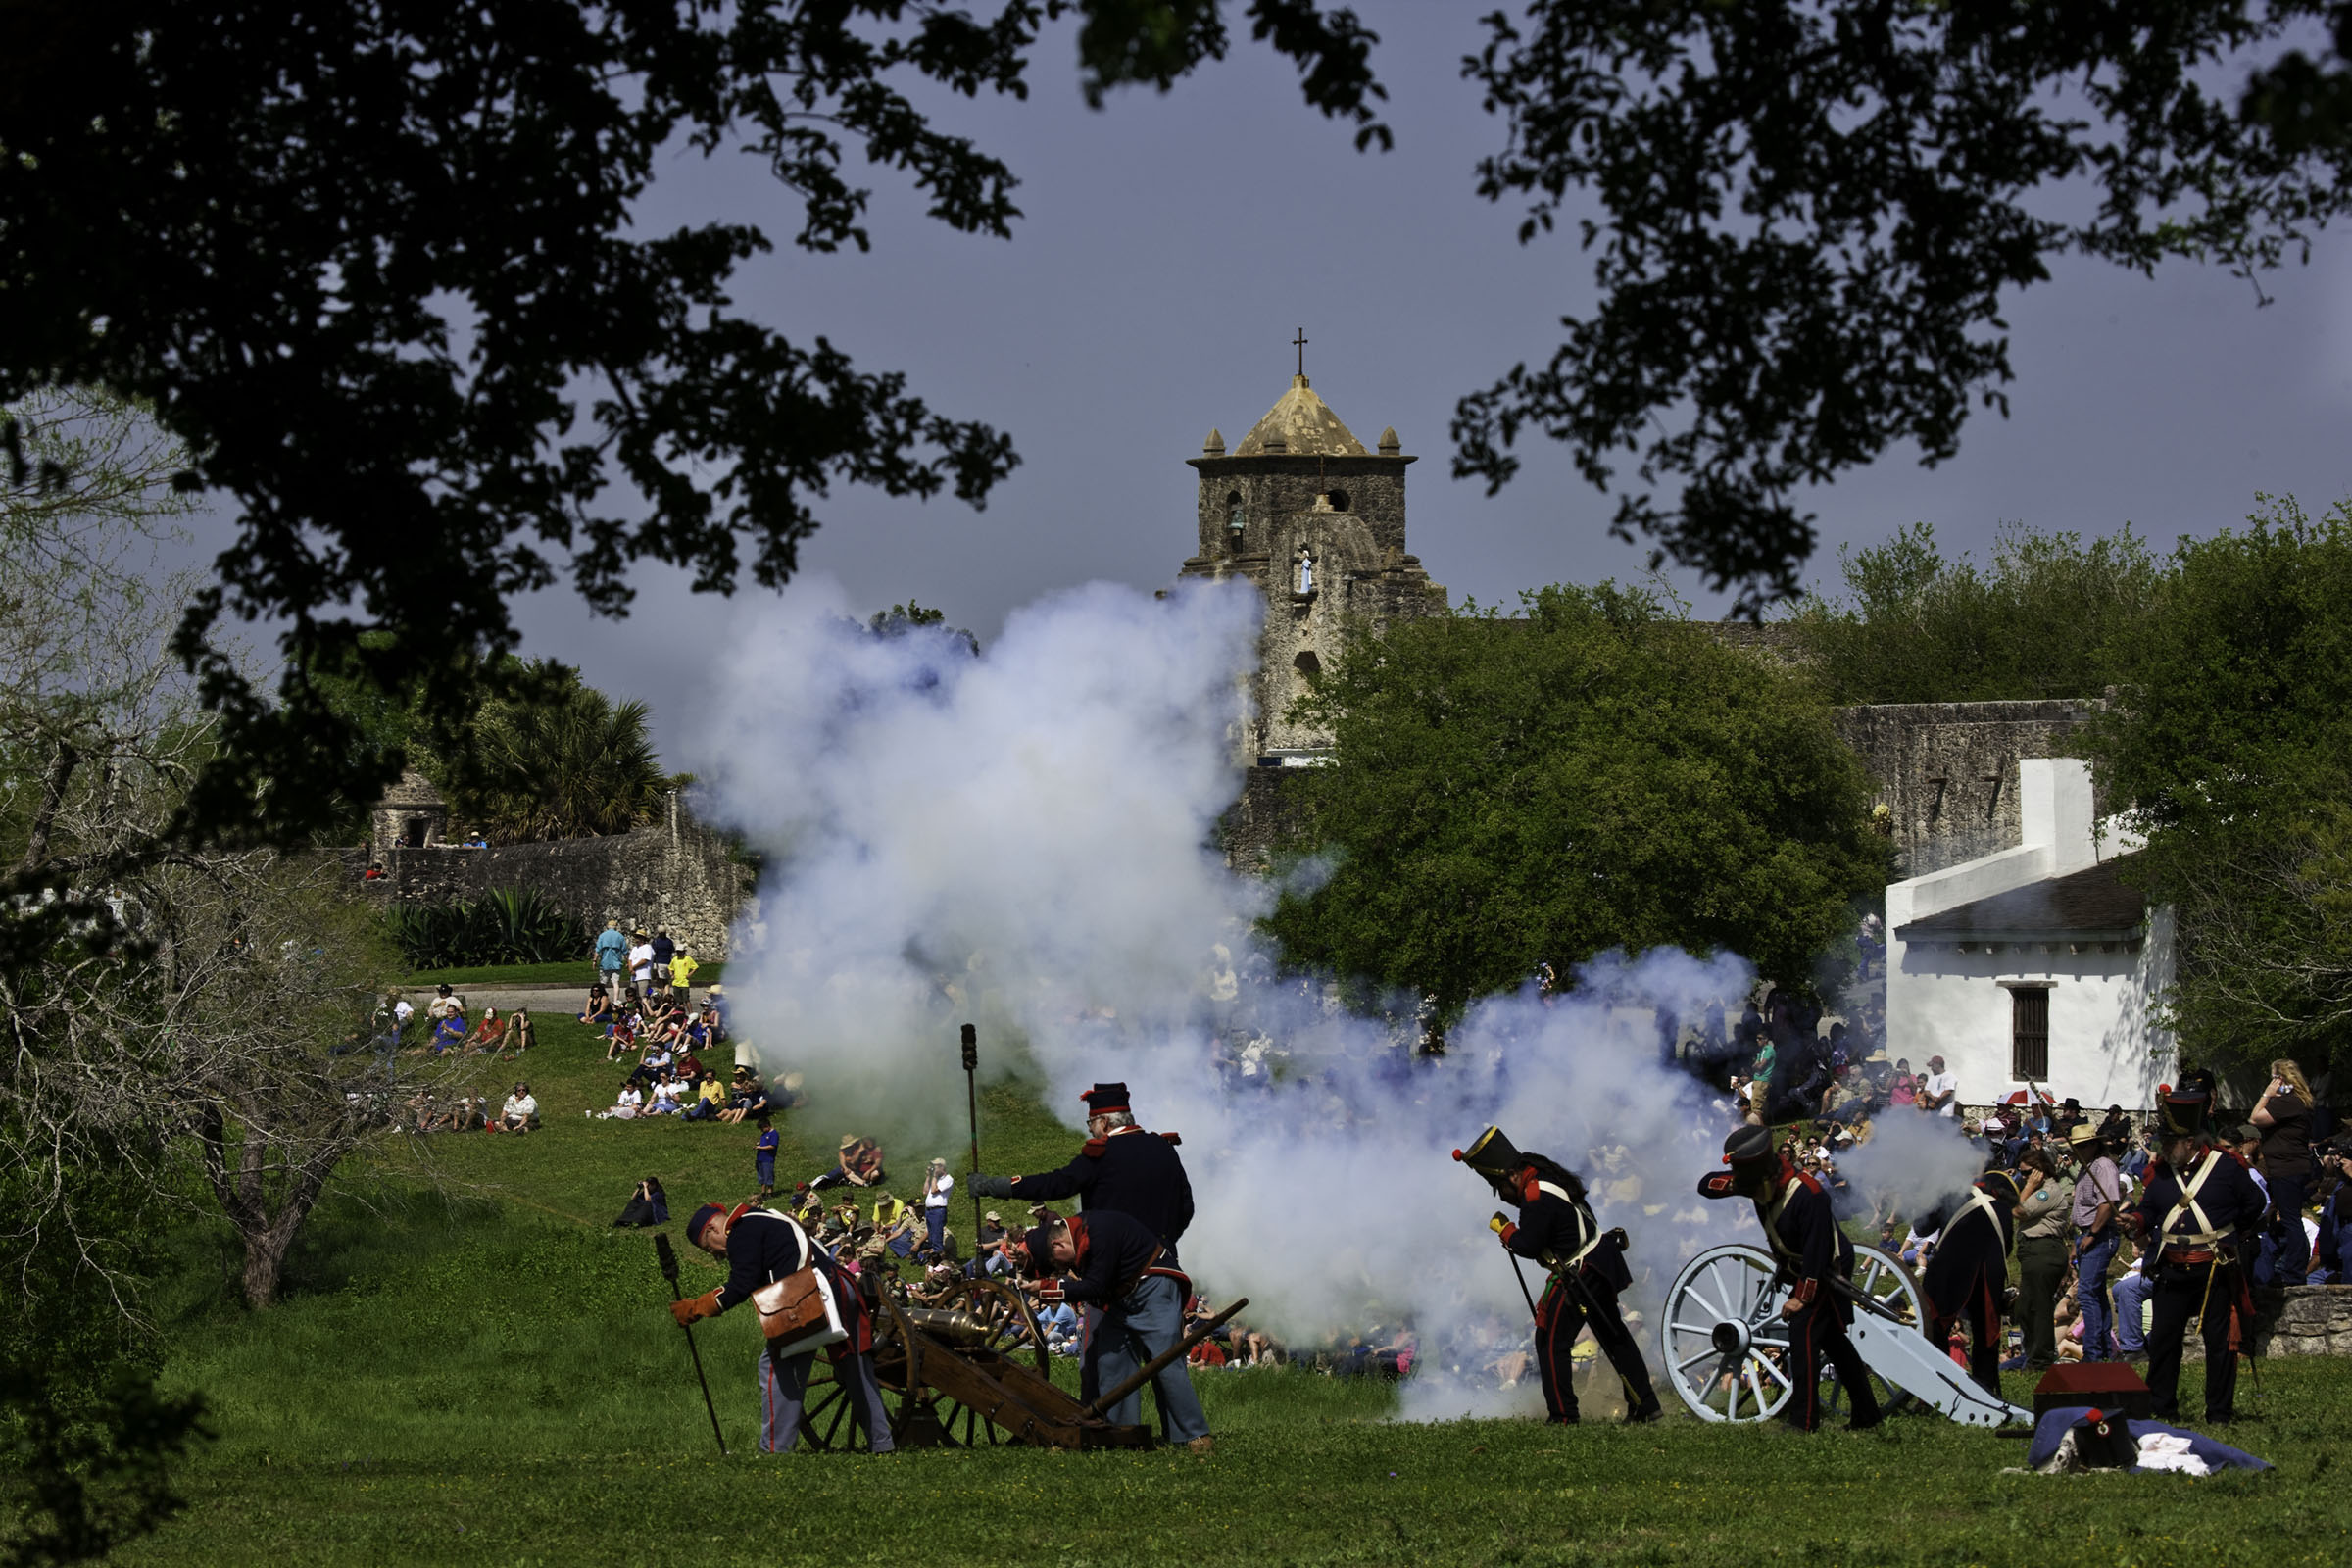 A war recreation on a grassy field. A cannon sends up a plume of white smoke as soldiers stand behind